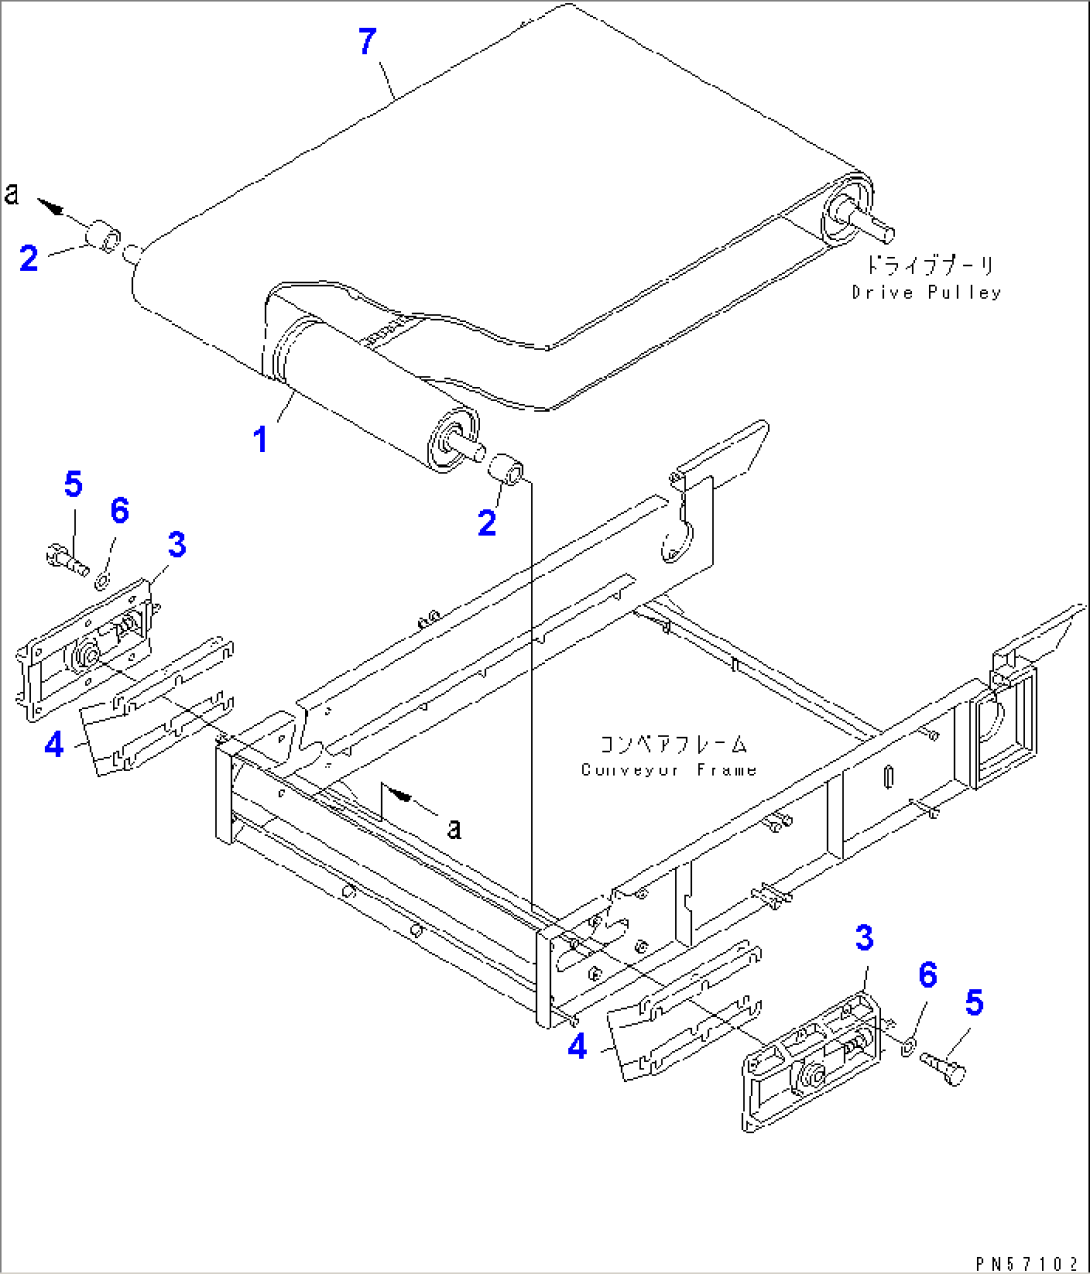 CONVEYOR (2/5) (WITH CHURNING SYSTEM) (TENSION PULLEY AND CONVEYOR BELT)